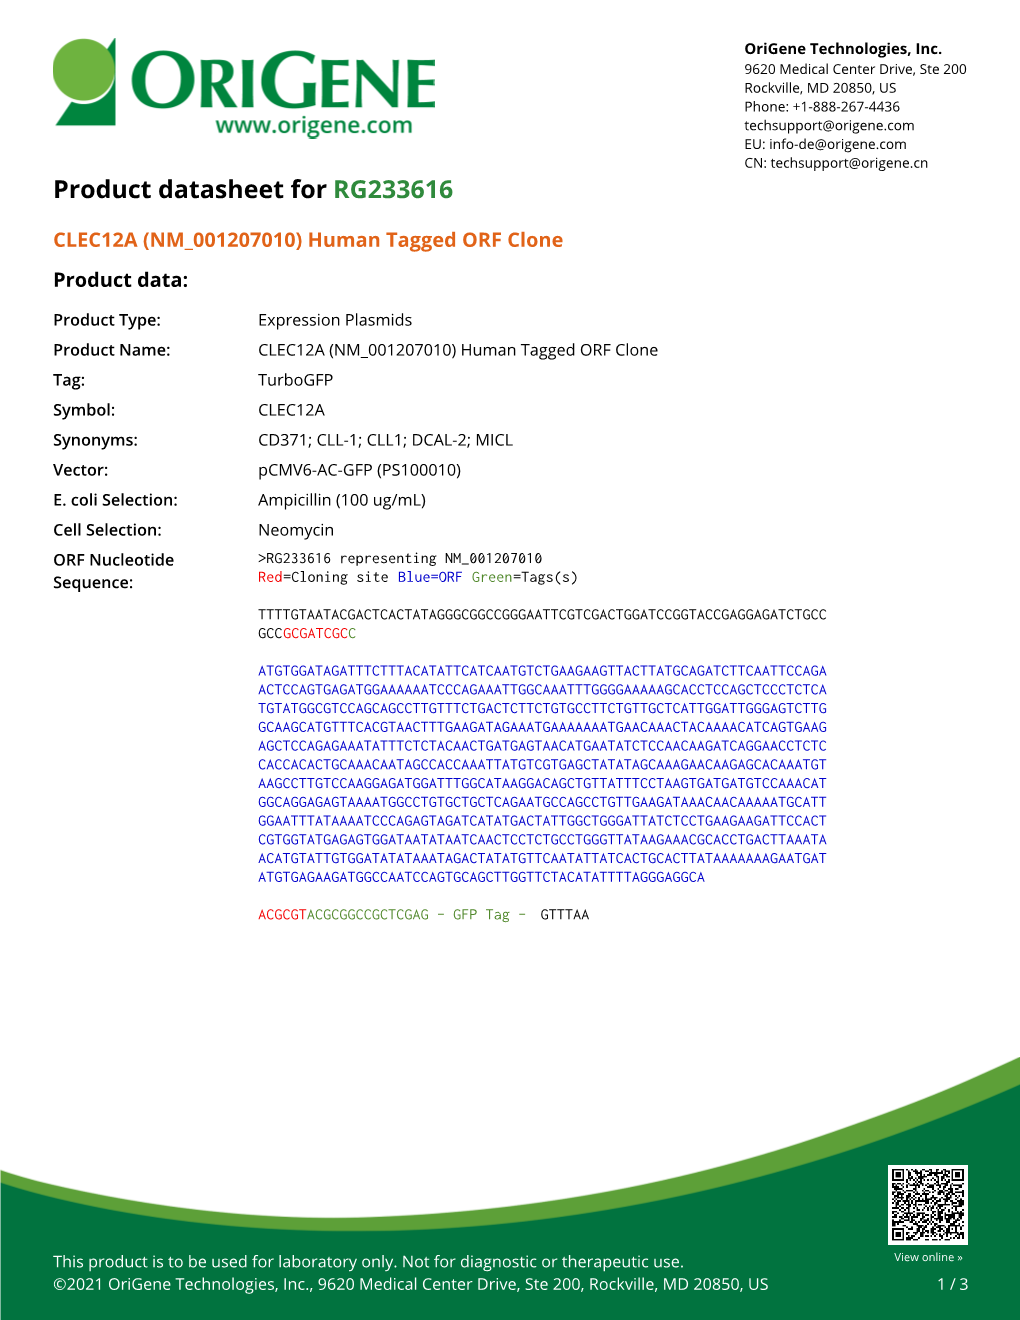 CLEC12A (NM 001207010) Human Tagged ORF Clone Product Data